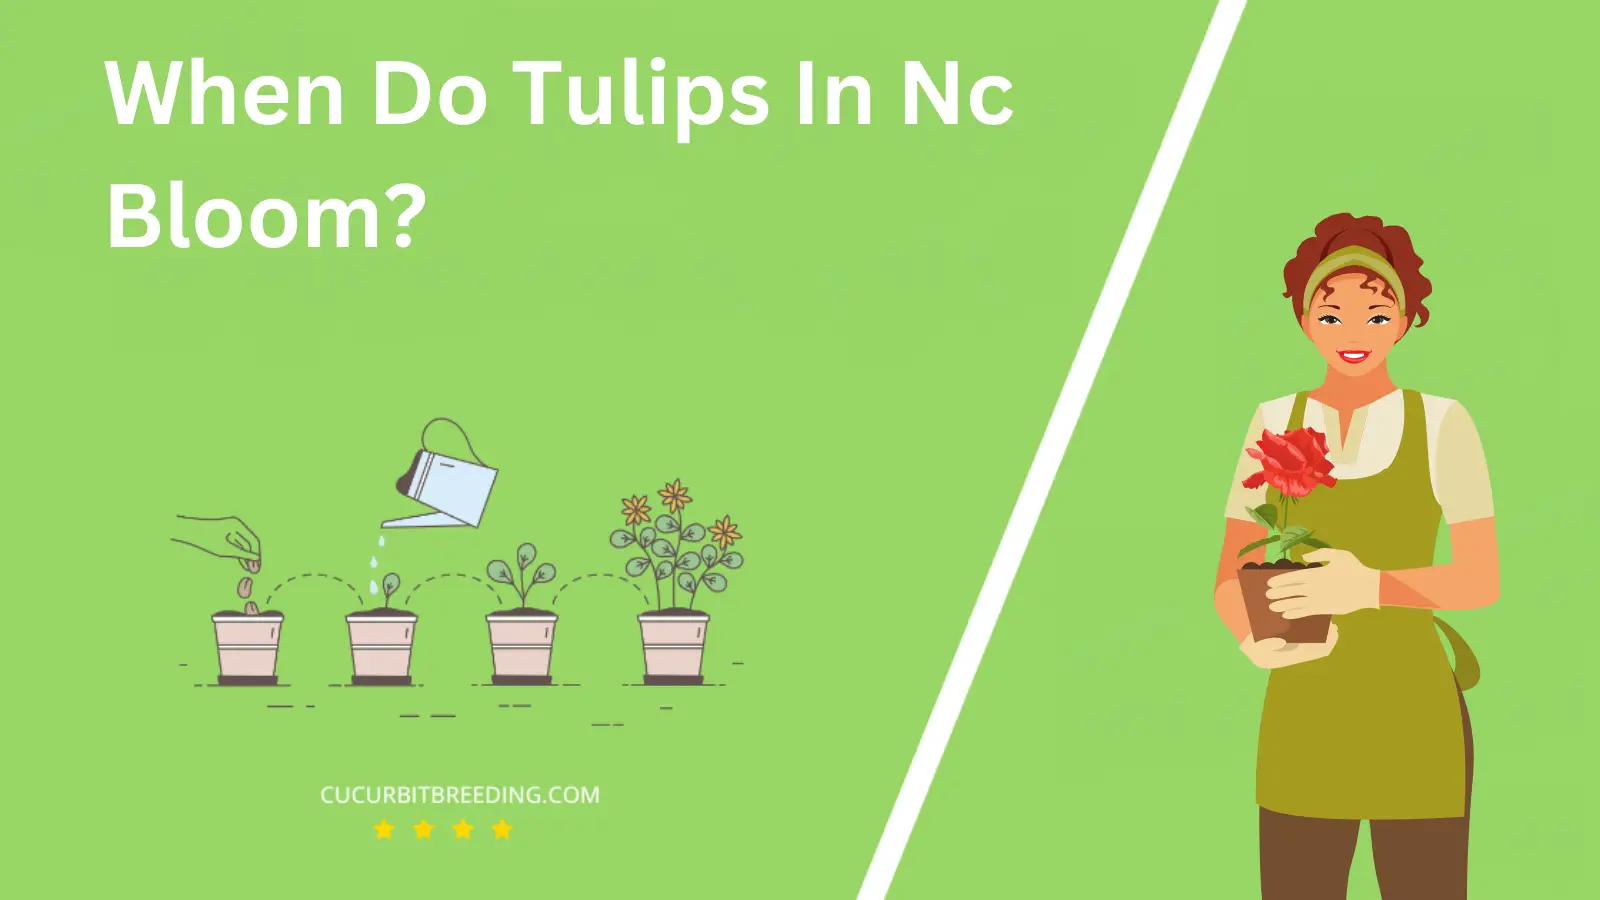 When Do Tulips In Nc Bloom?